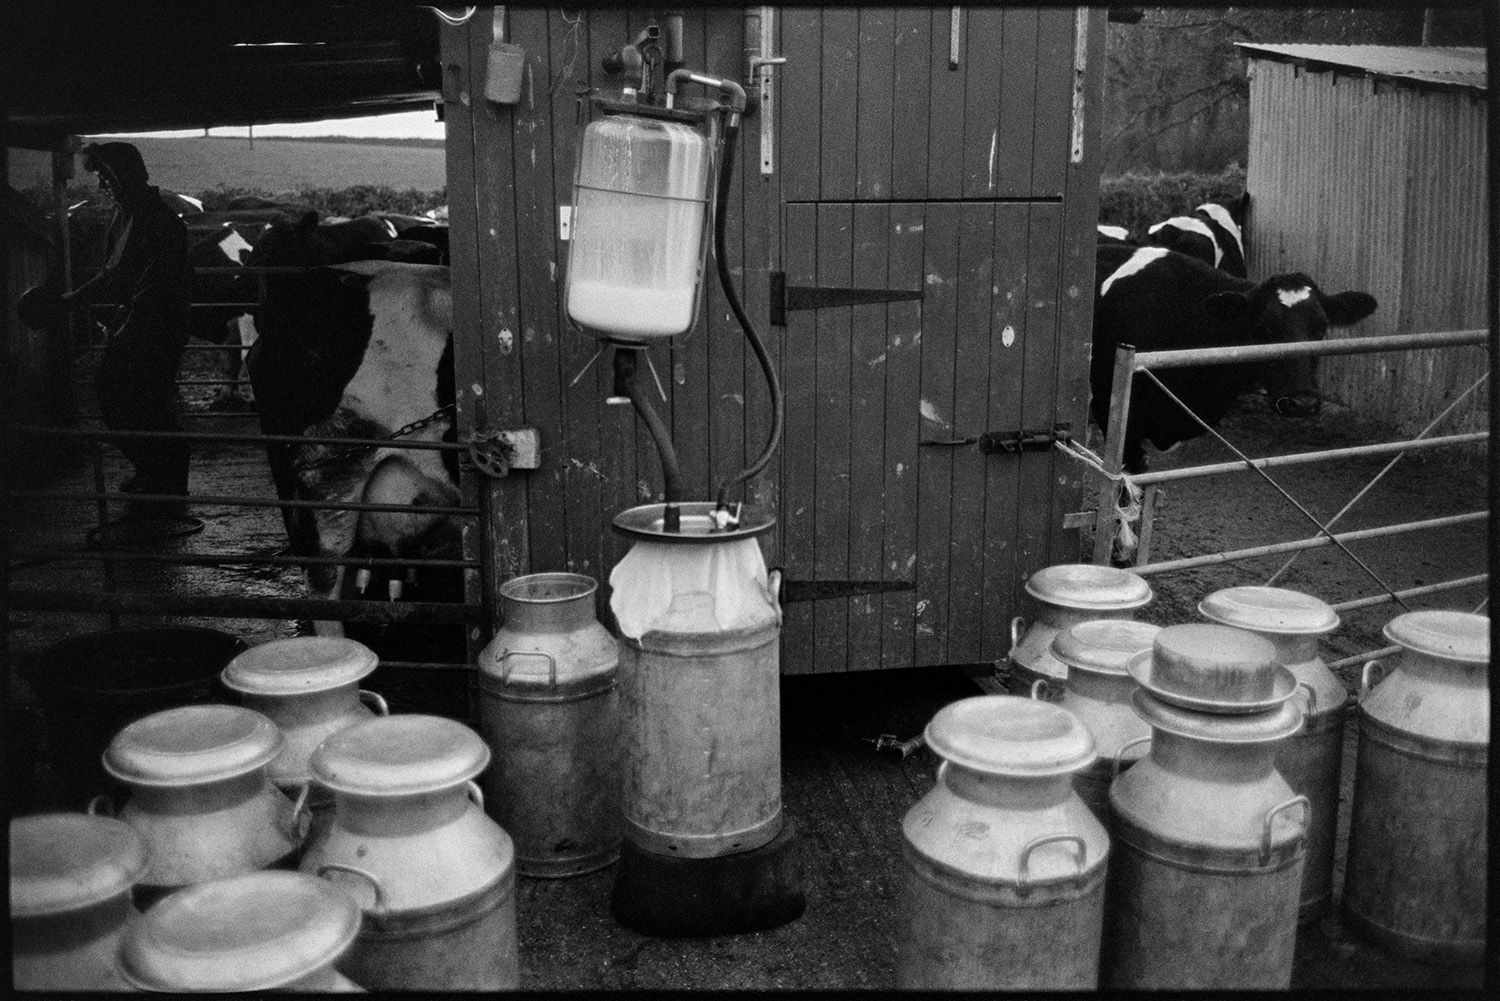 Milk churns being automatically filled from a milking system mounted on the back of the milking shed at Parsonage Farm, Iddesleigh. Cows are being milked in the shed in the background.